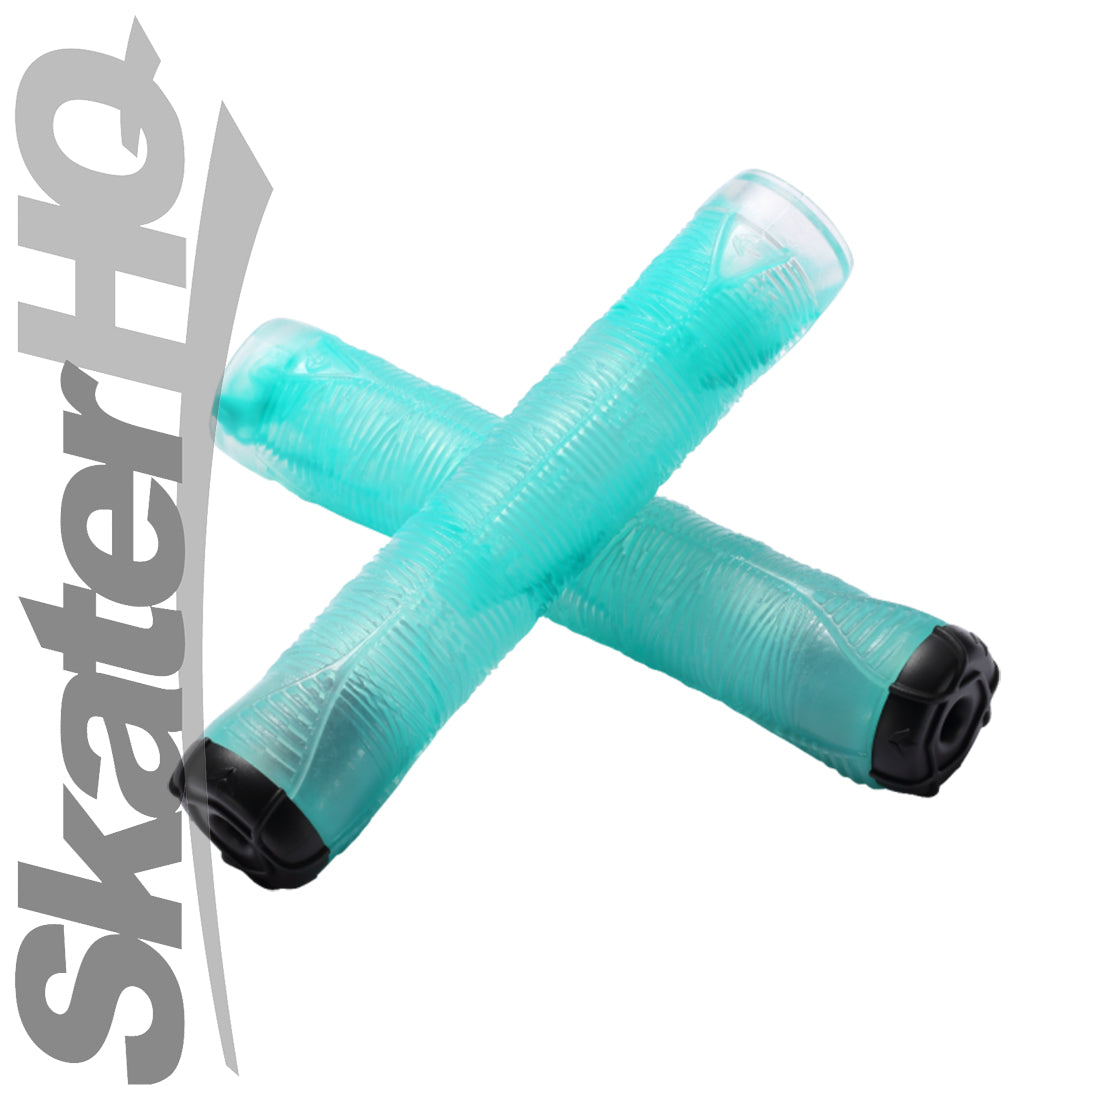 Envy V2 Hand Grips - Smoke Teal Scooter Grips